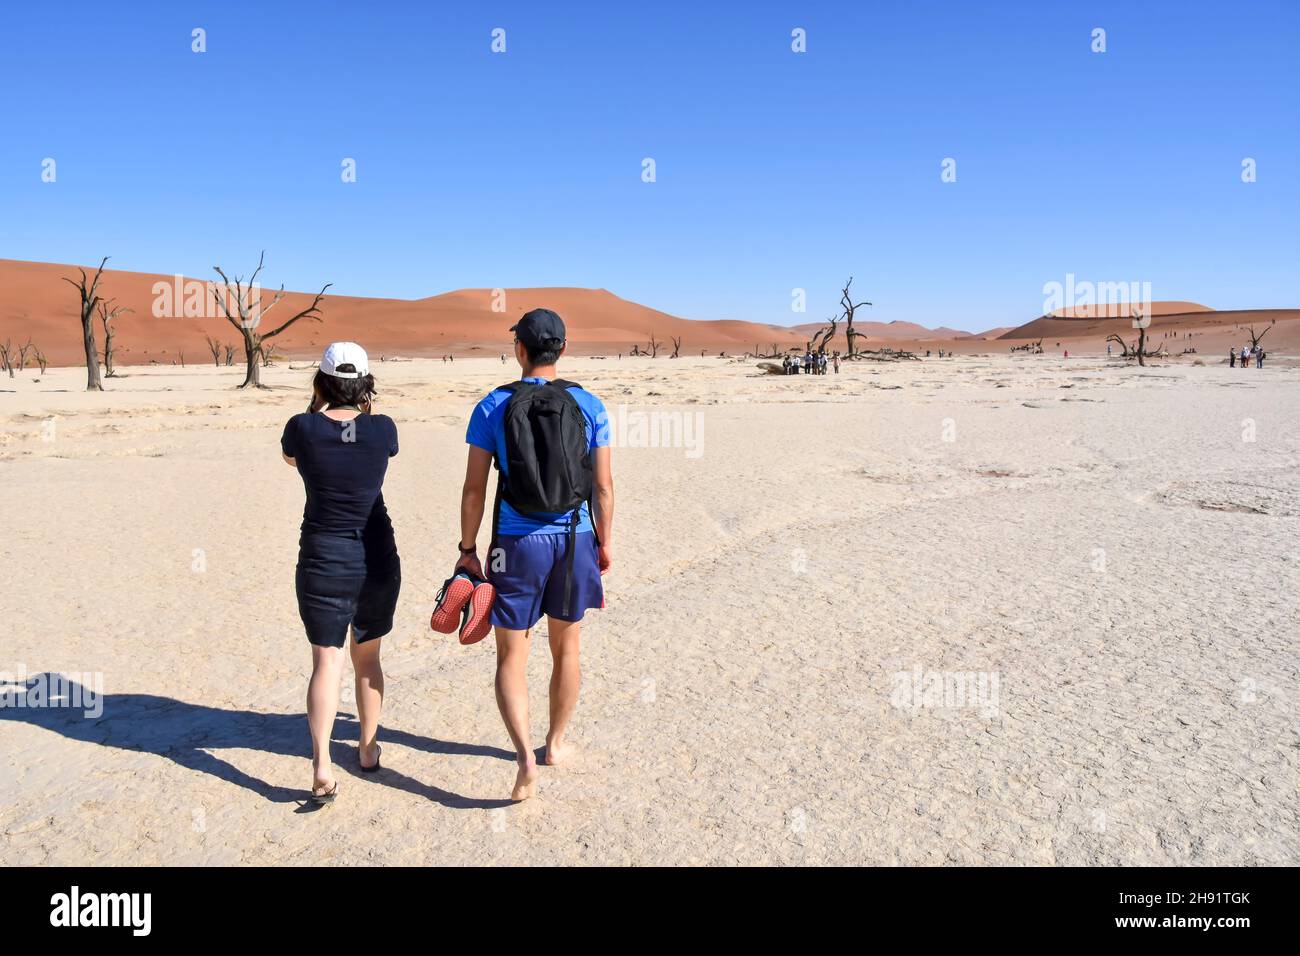 Tourist near the dead or dry lake near the famous sand dunes in the Namib-Naukluft park area in Namibia Southern Africa Stock Photo